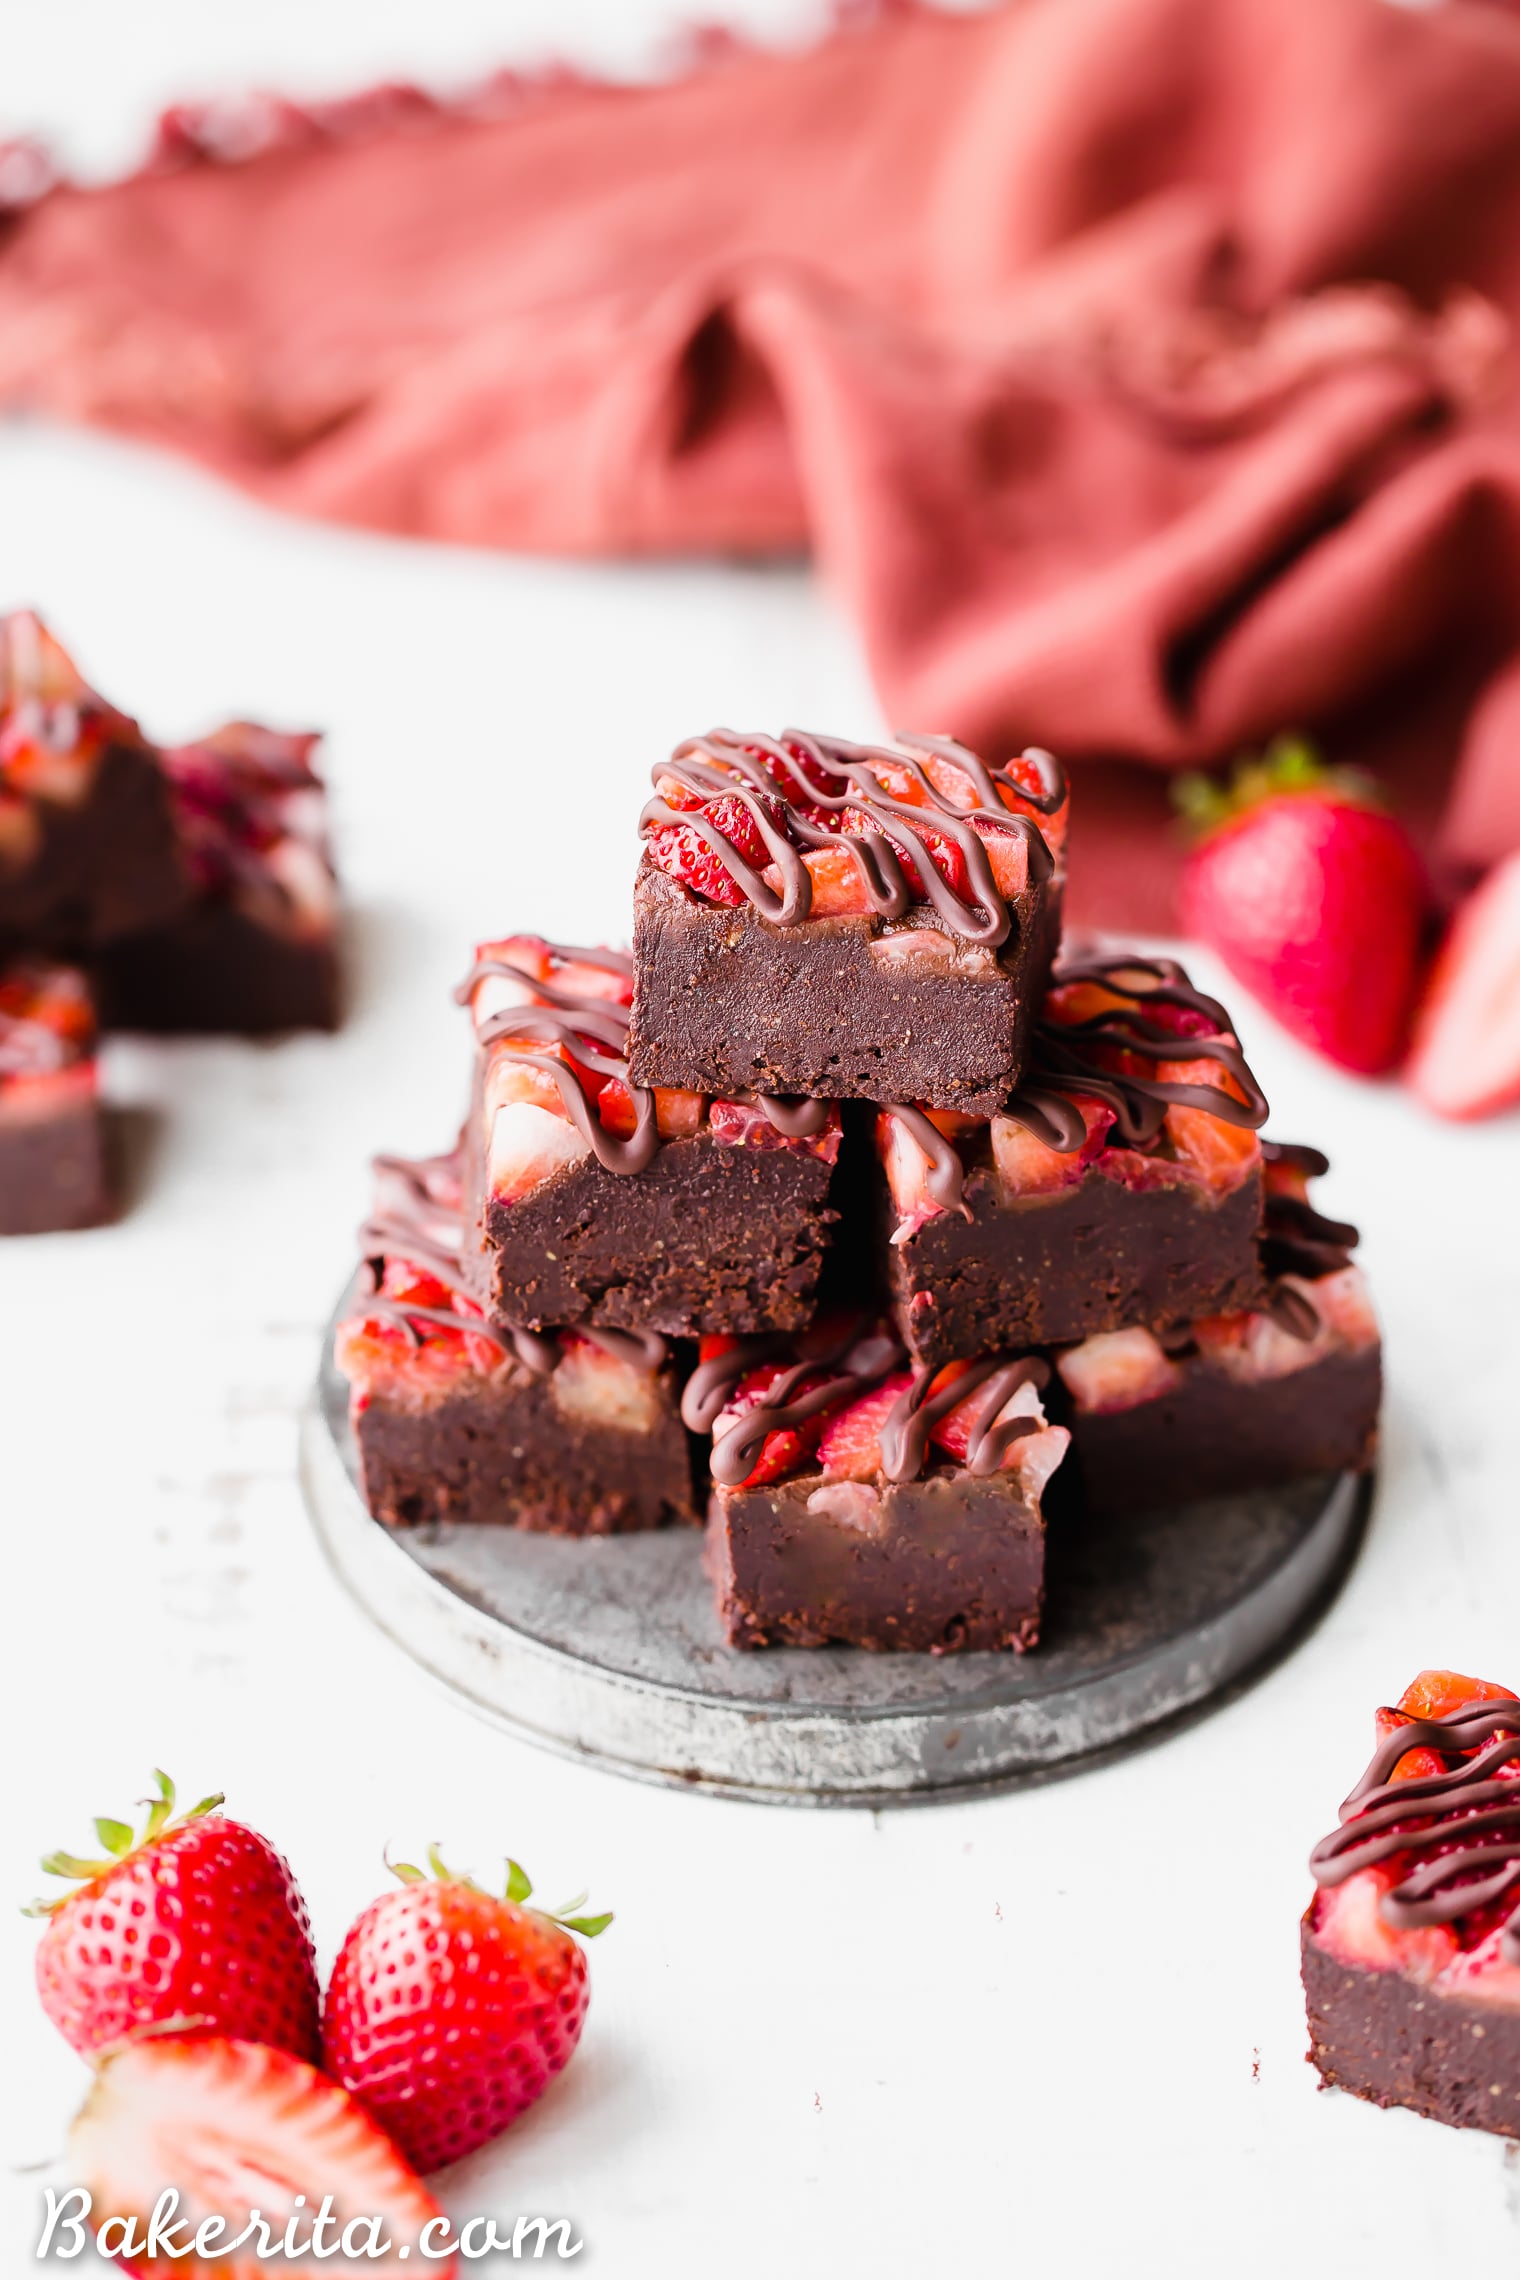 This Chocolate Strawberry Fudge is a simple and delicious five-ingredient recipe you'll want to make over and over! This fudge tastes just like chocolate covered strawberries. There's no cooking required for this gluten-free, paleo and vegan fudge recipe. 